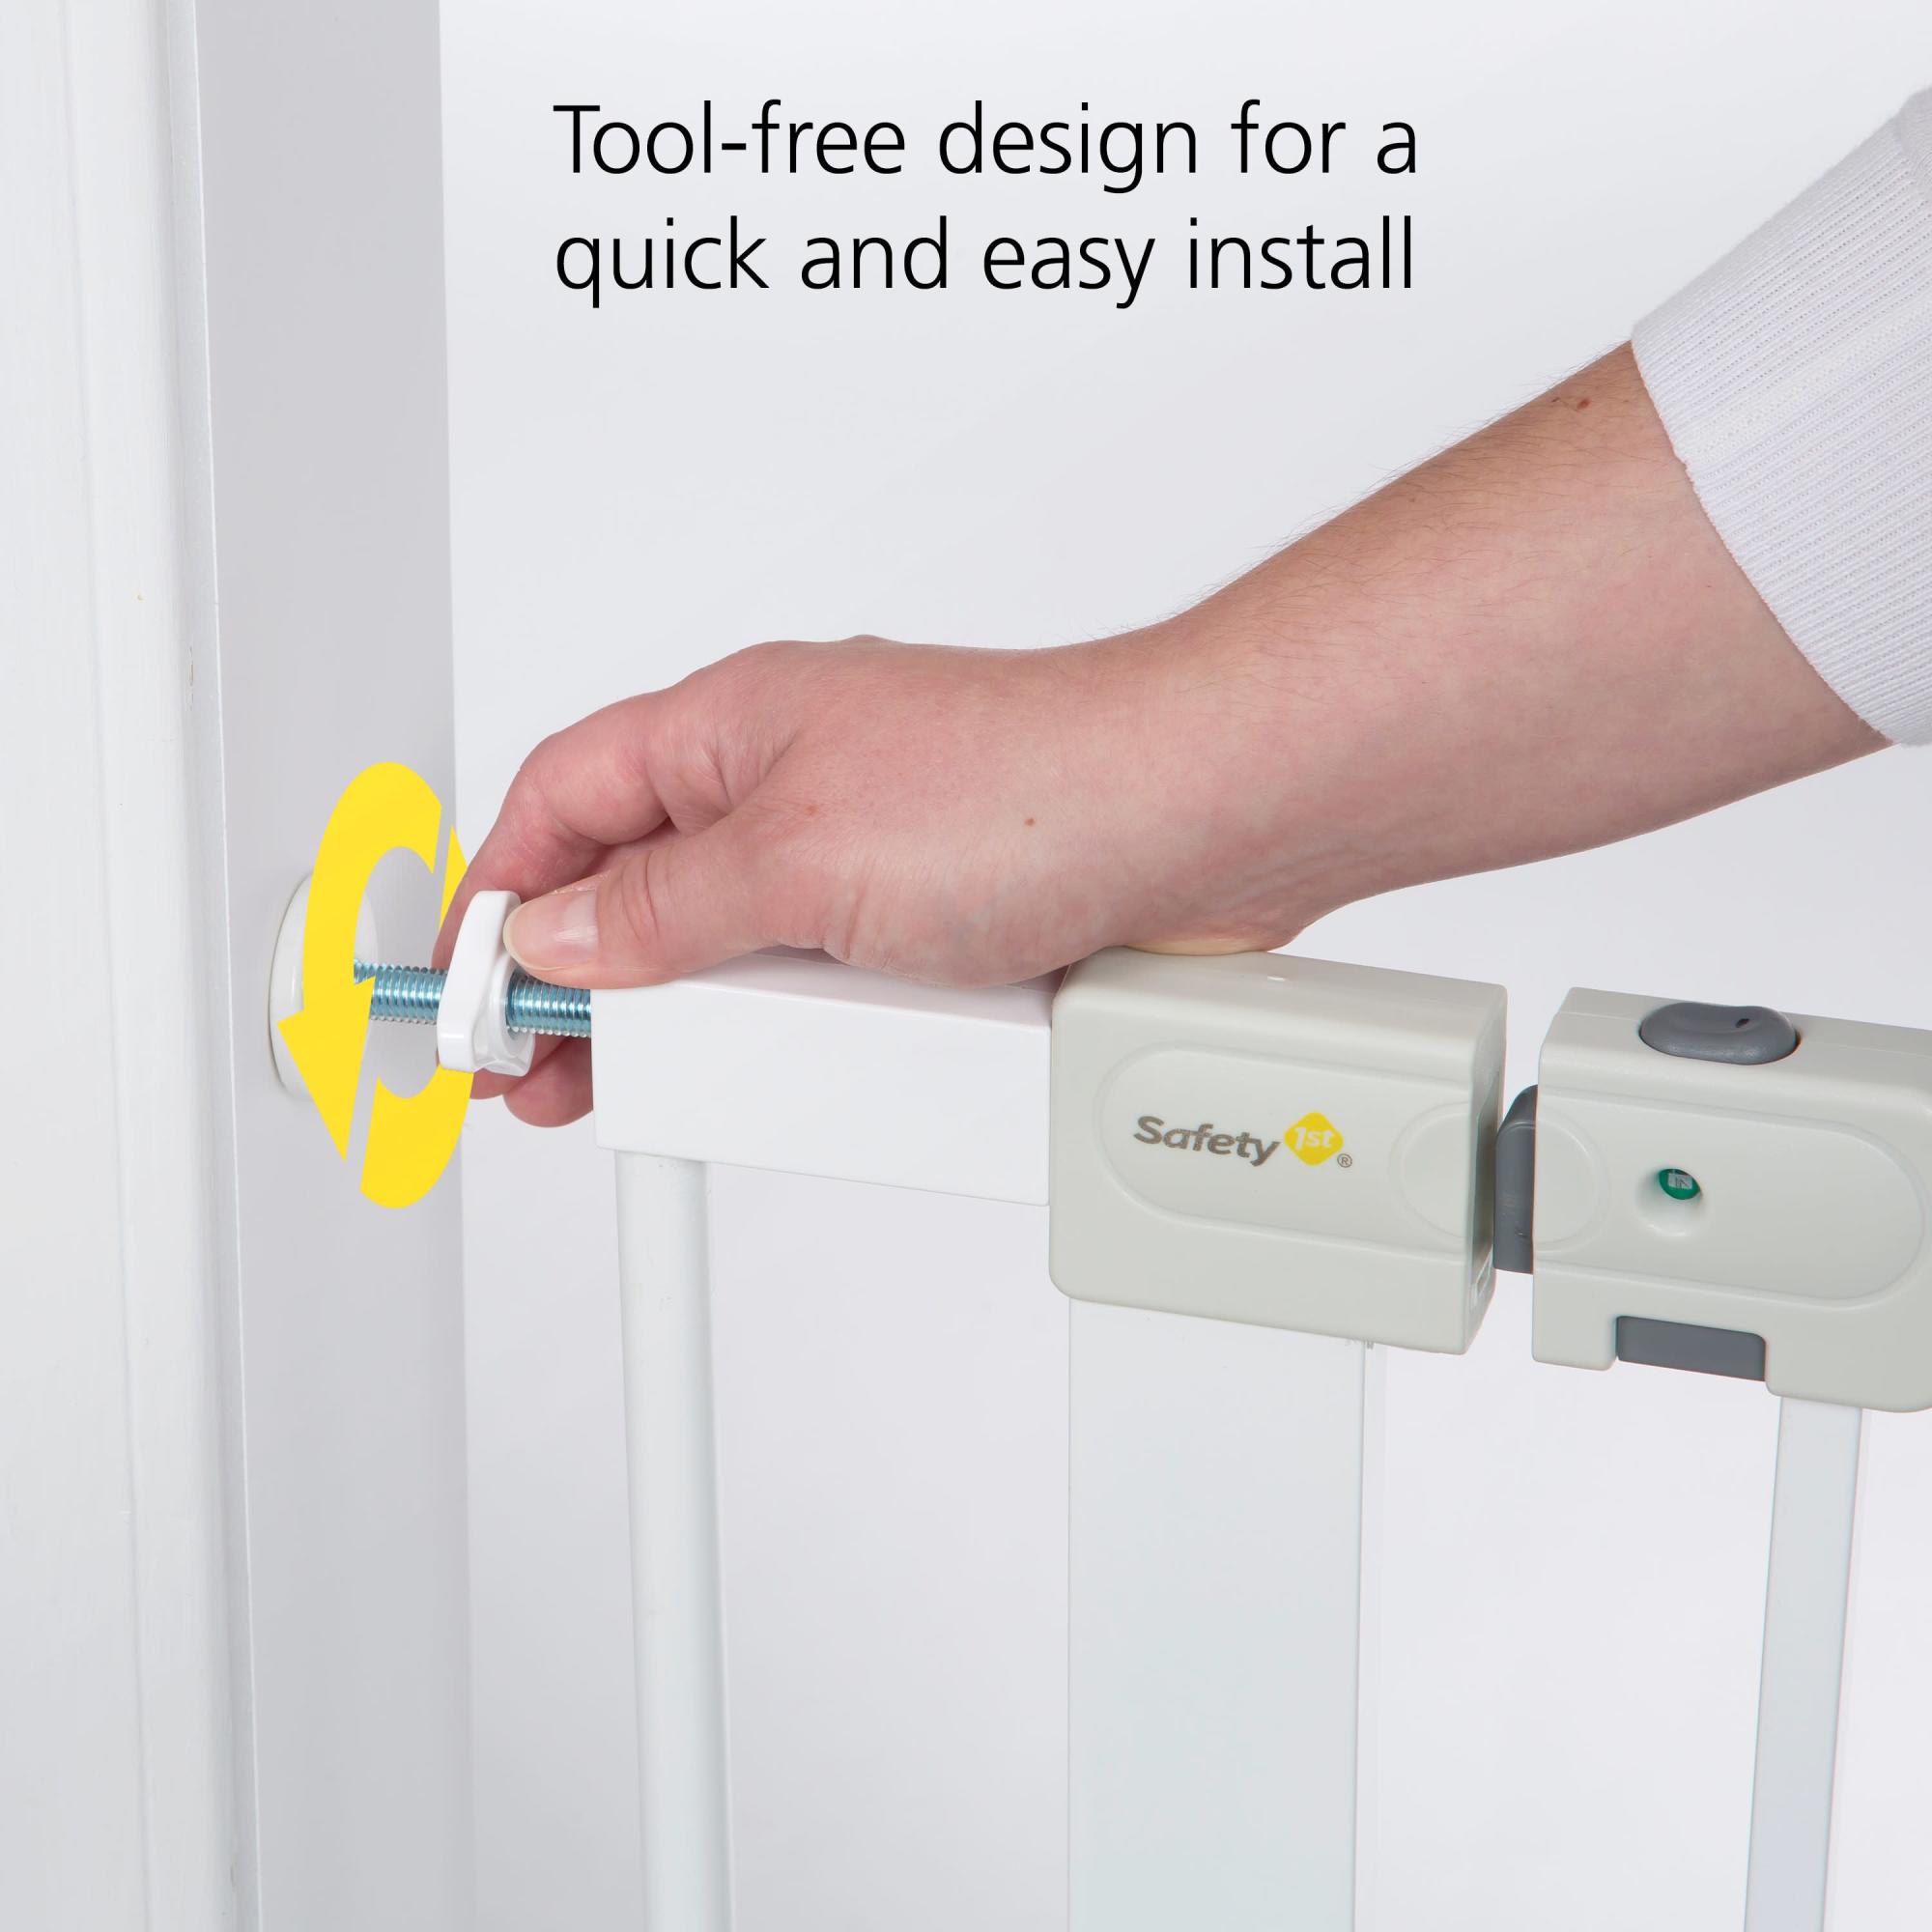 Safety 1st Tool-Free design for a quick and easy install